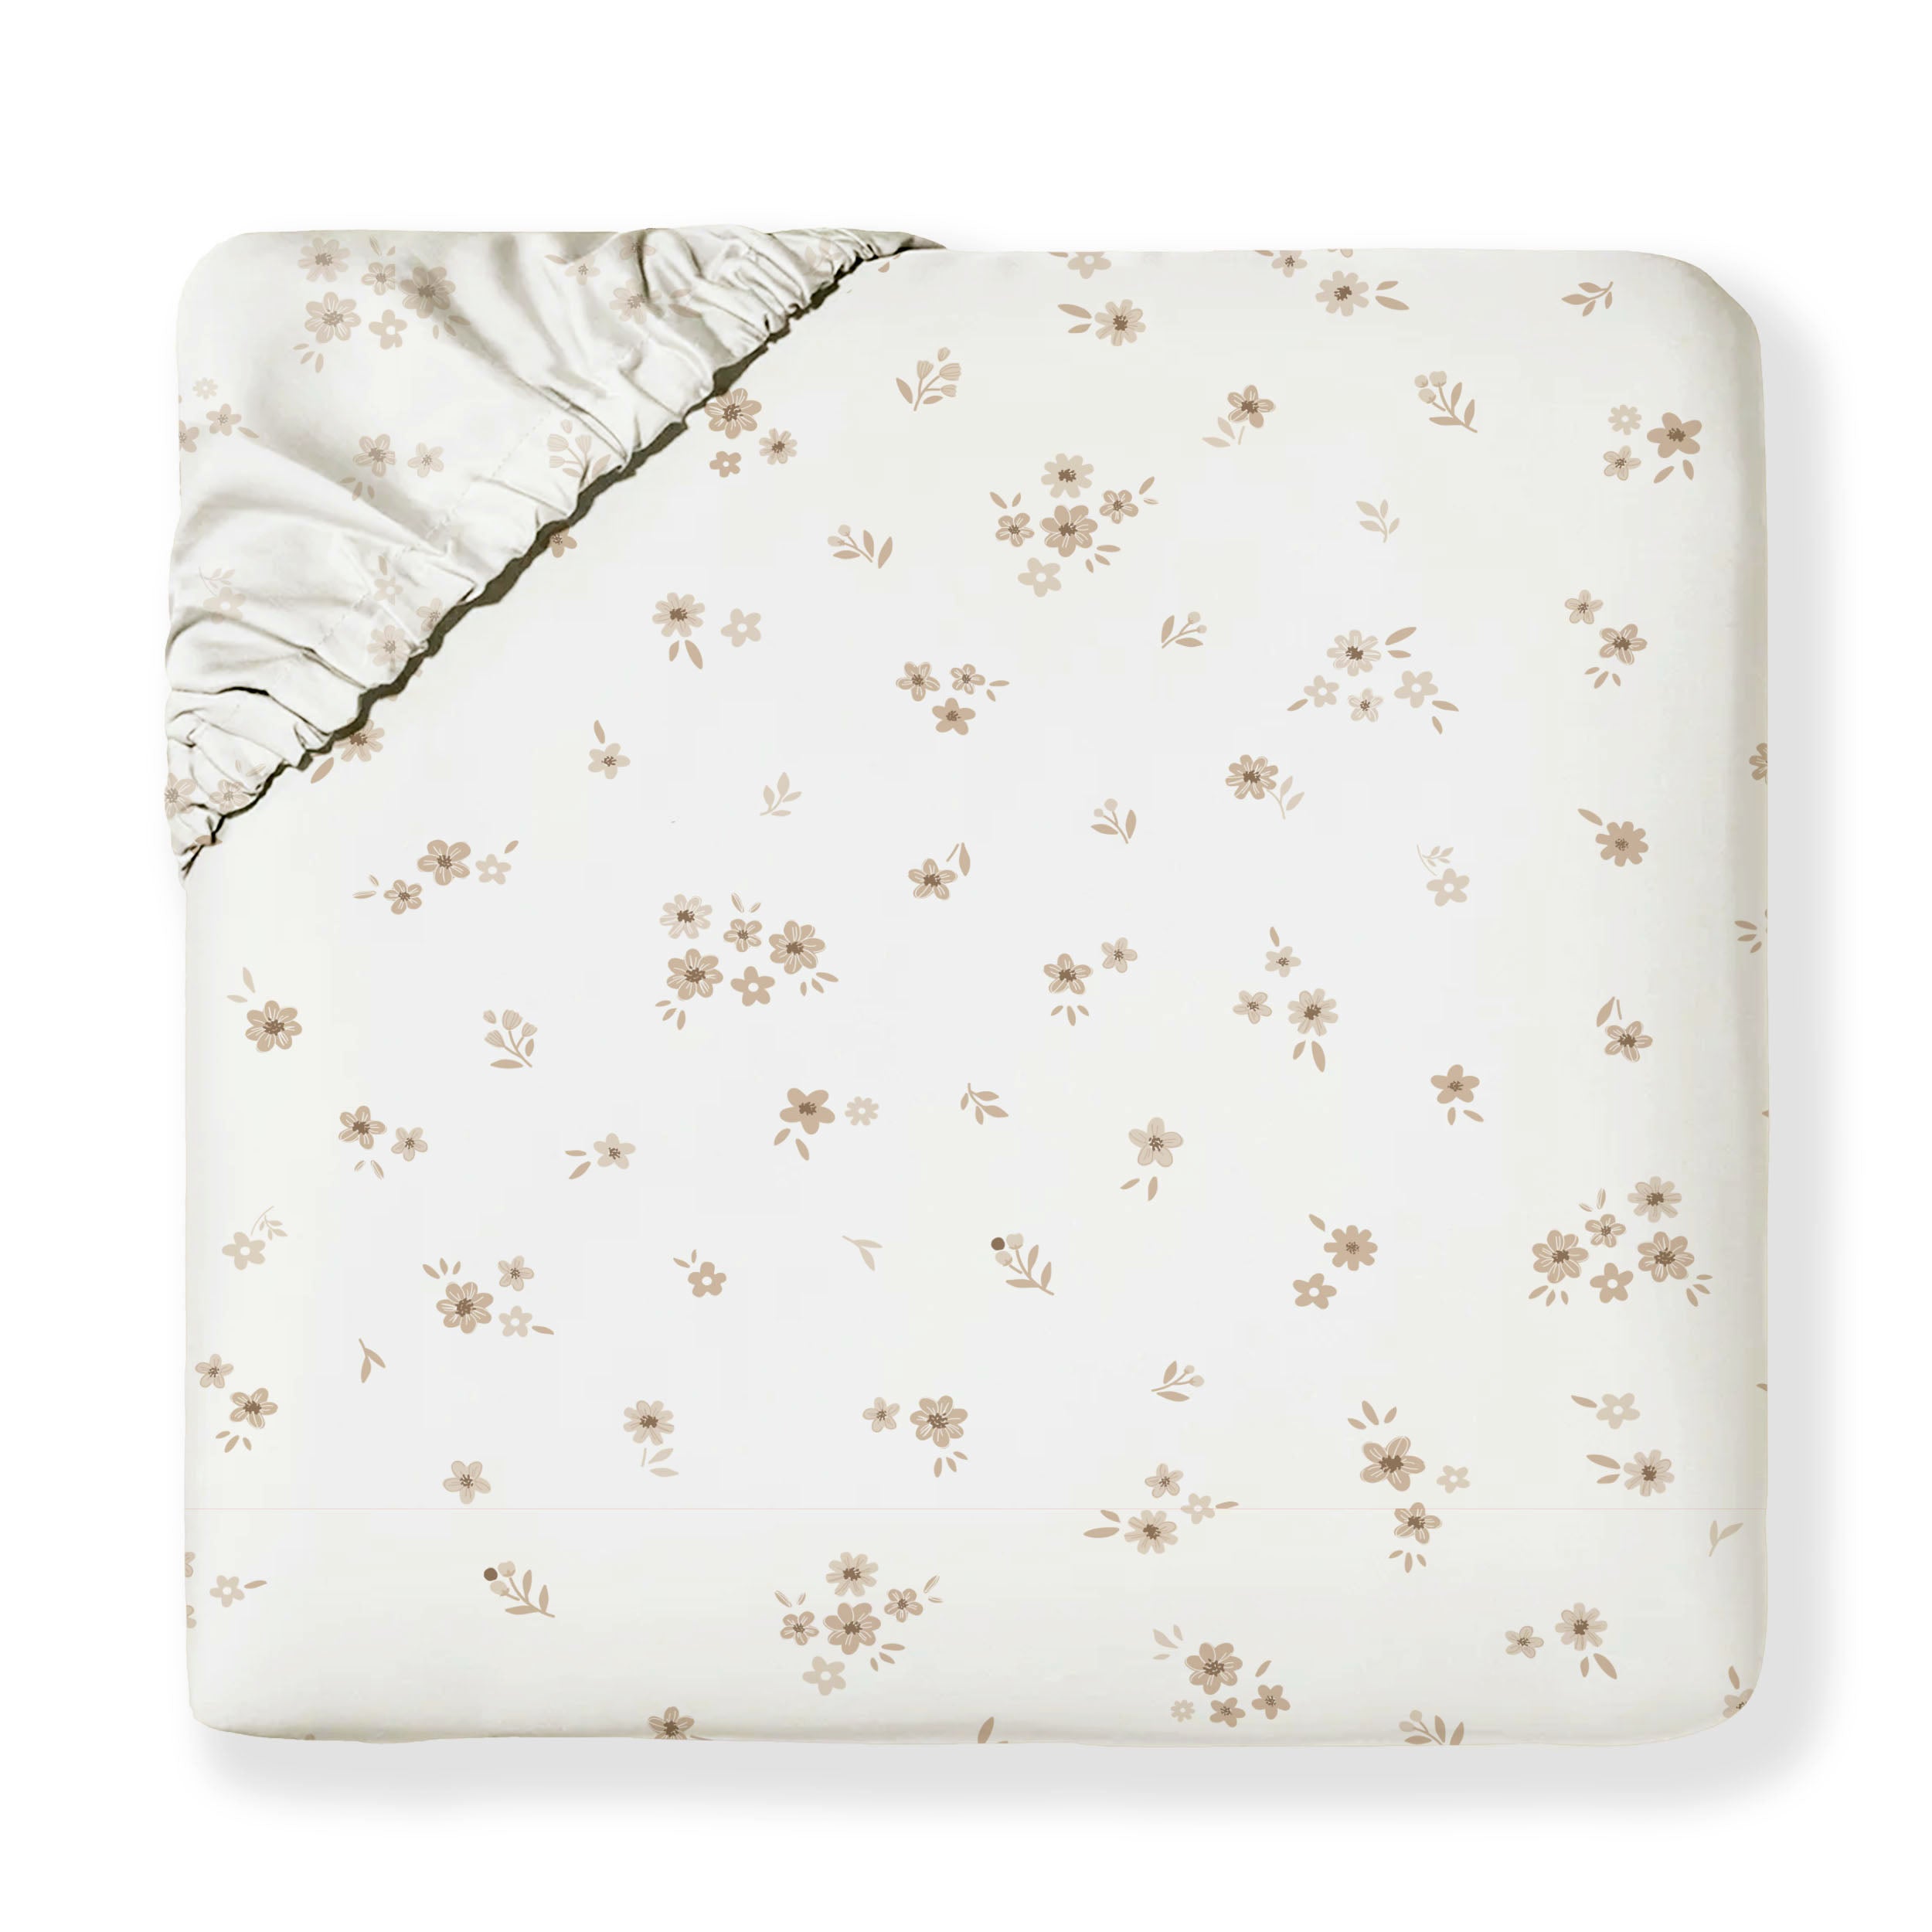 A square-shaped, plush mattress topper with a cream color and a delicate brown floral pattern, featuring a folded corner revealing a light green underside. - Makemake Organics's Bloom Organic Cotton Fitted Sheet Set.